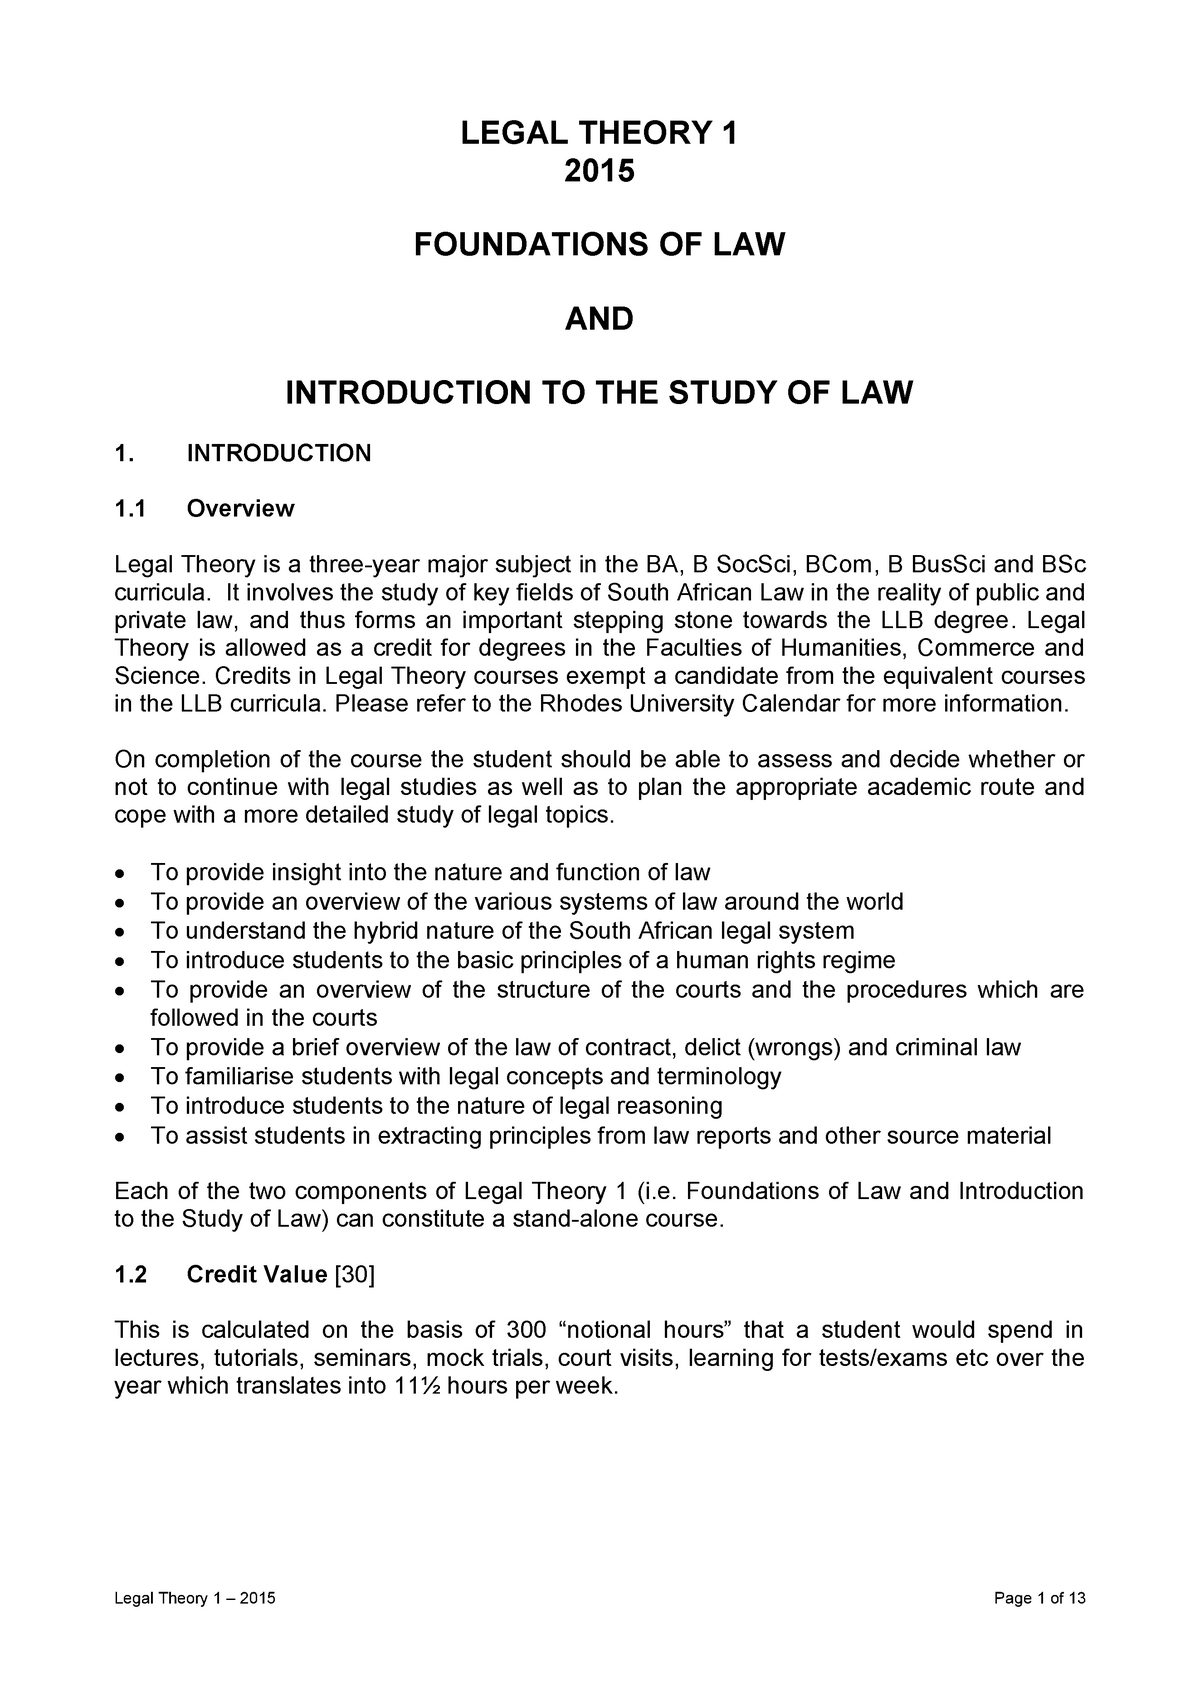 introduction in law essay